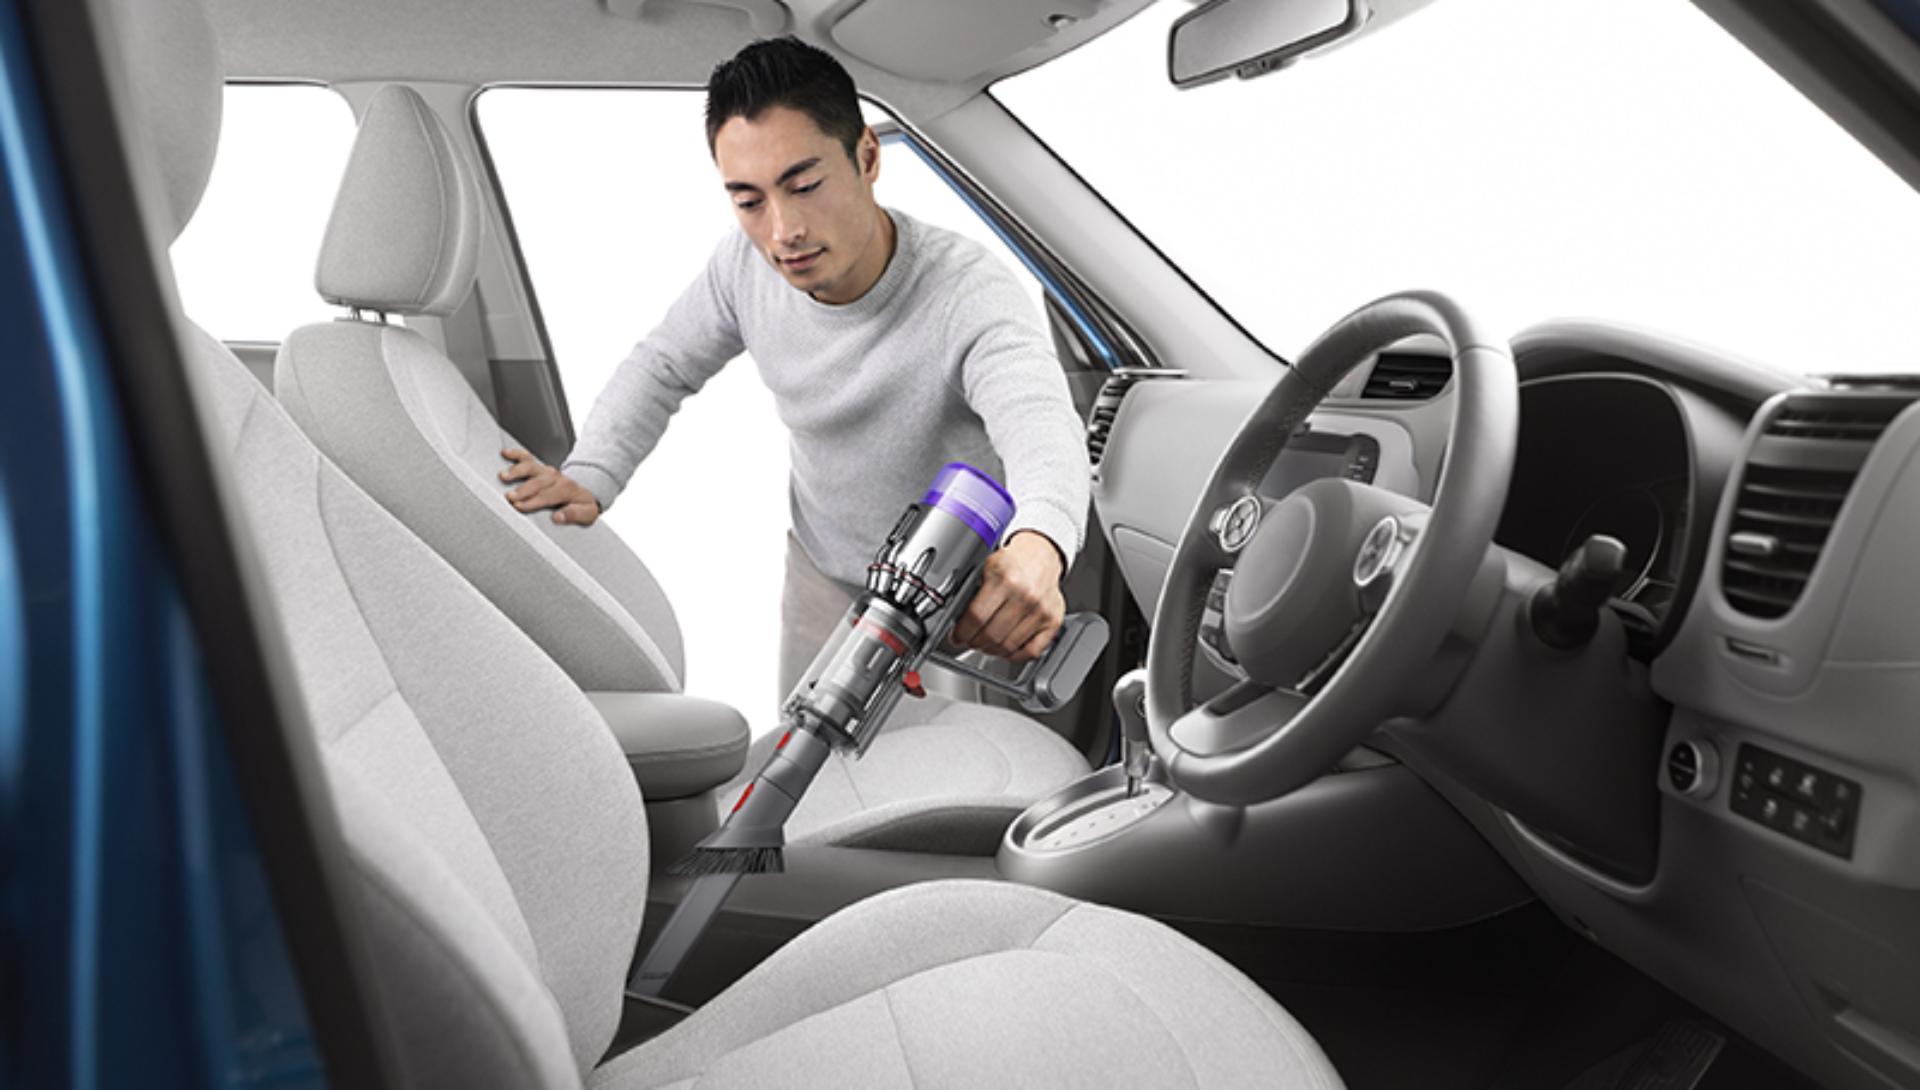 Dyson Humdinger being used to clean the inside of a car